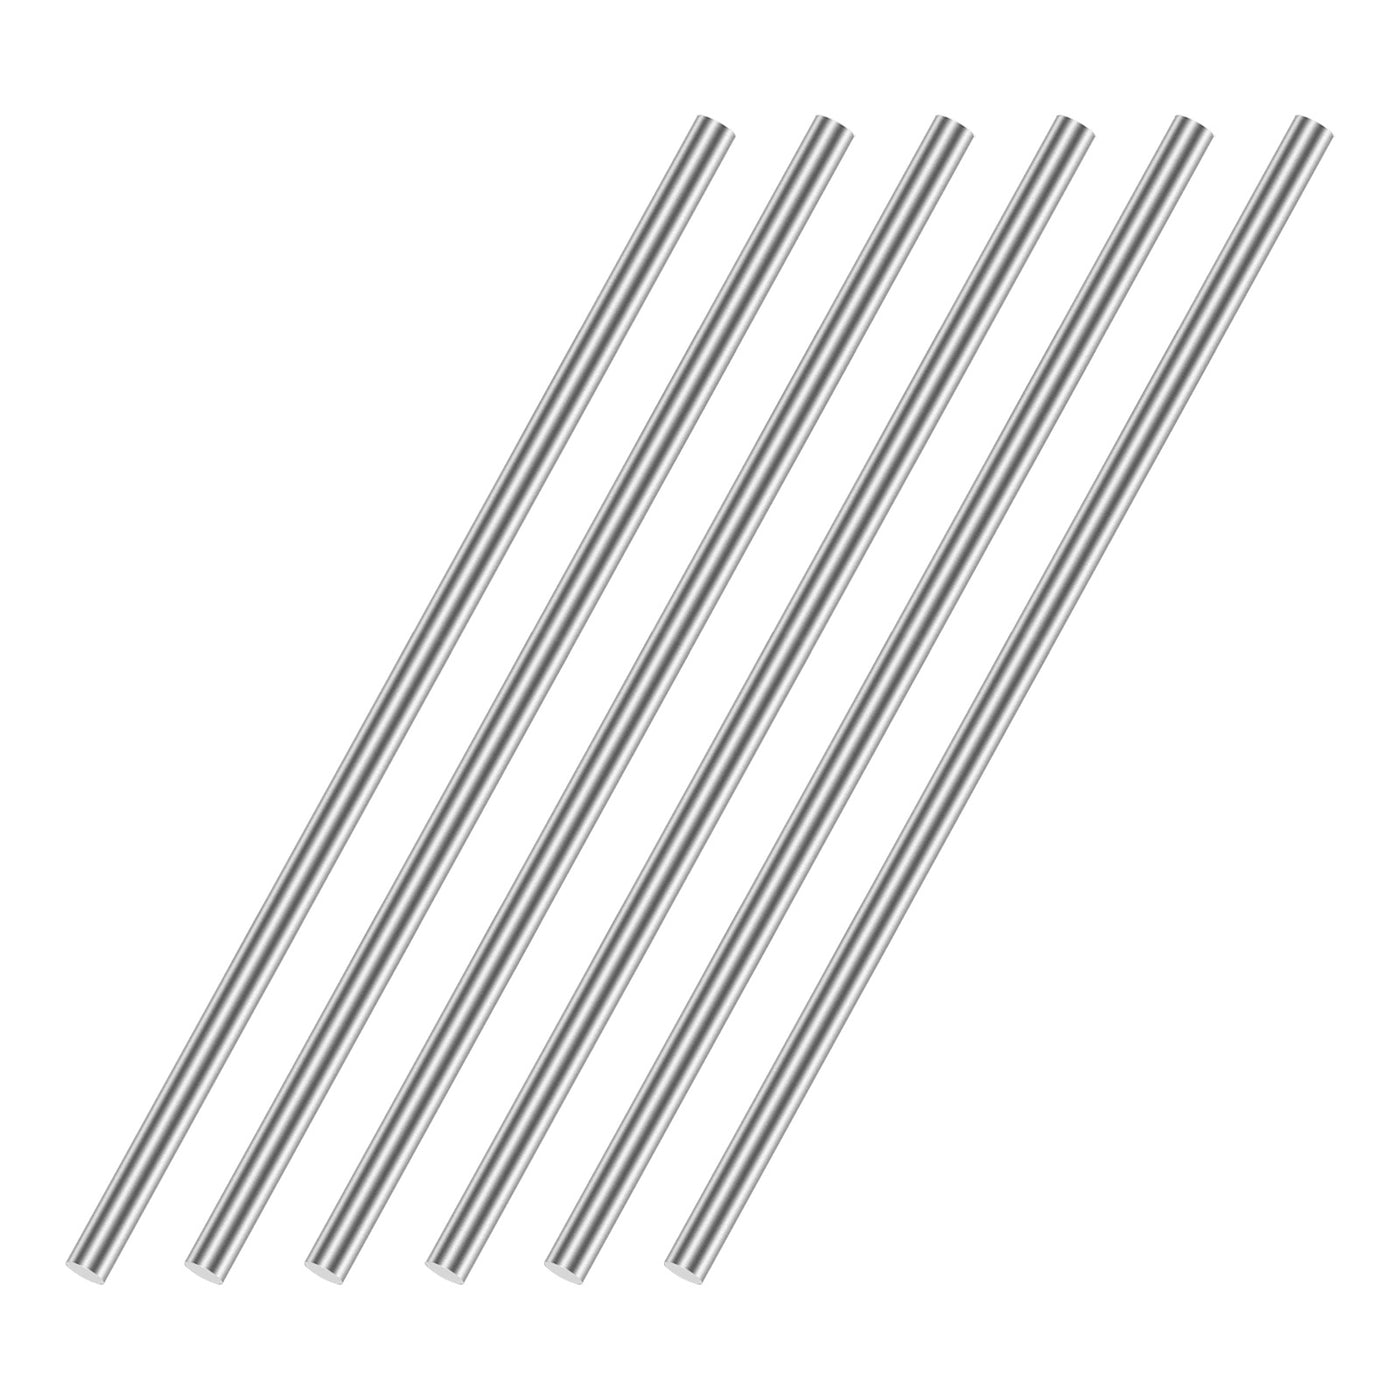 uxcell Uxcell 5mm x 150mm 304 Stainless Steel Solid Round Rod for DIY Craft - 6pcs